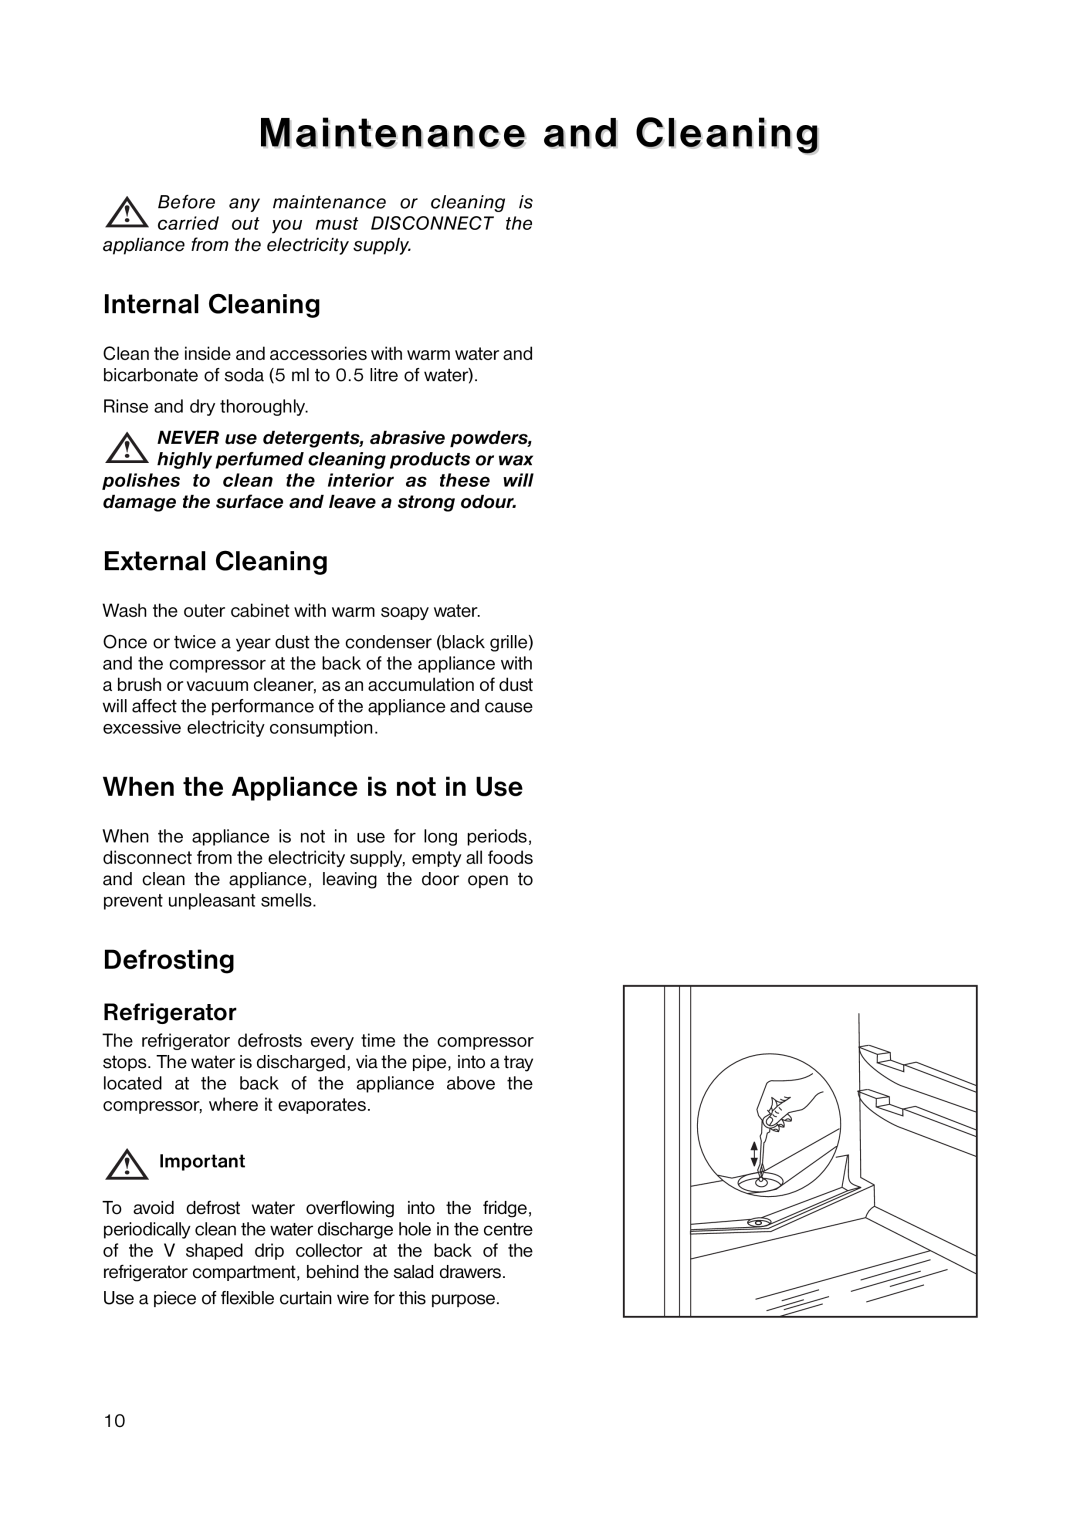 Zanussi ZRD 7846 manual Maintenance and Cleaning, Internal Cleaning, External Cleaning, When the Appliance is not in Use 